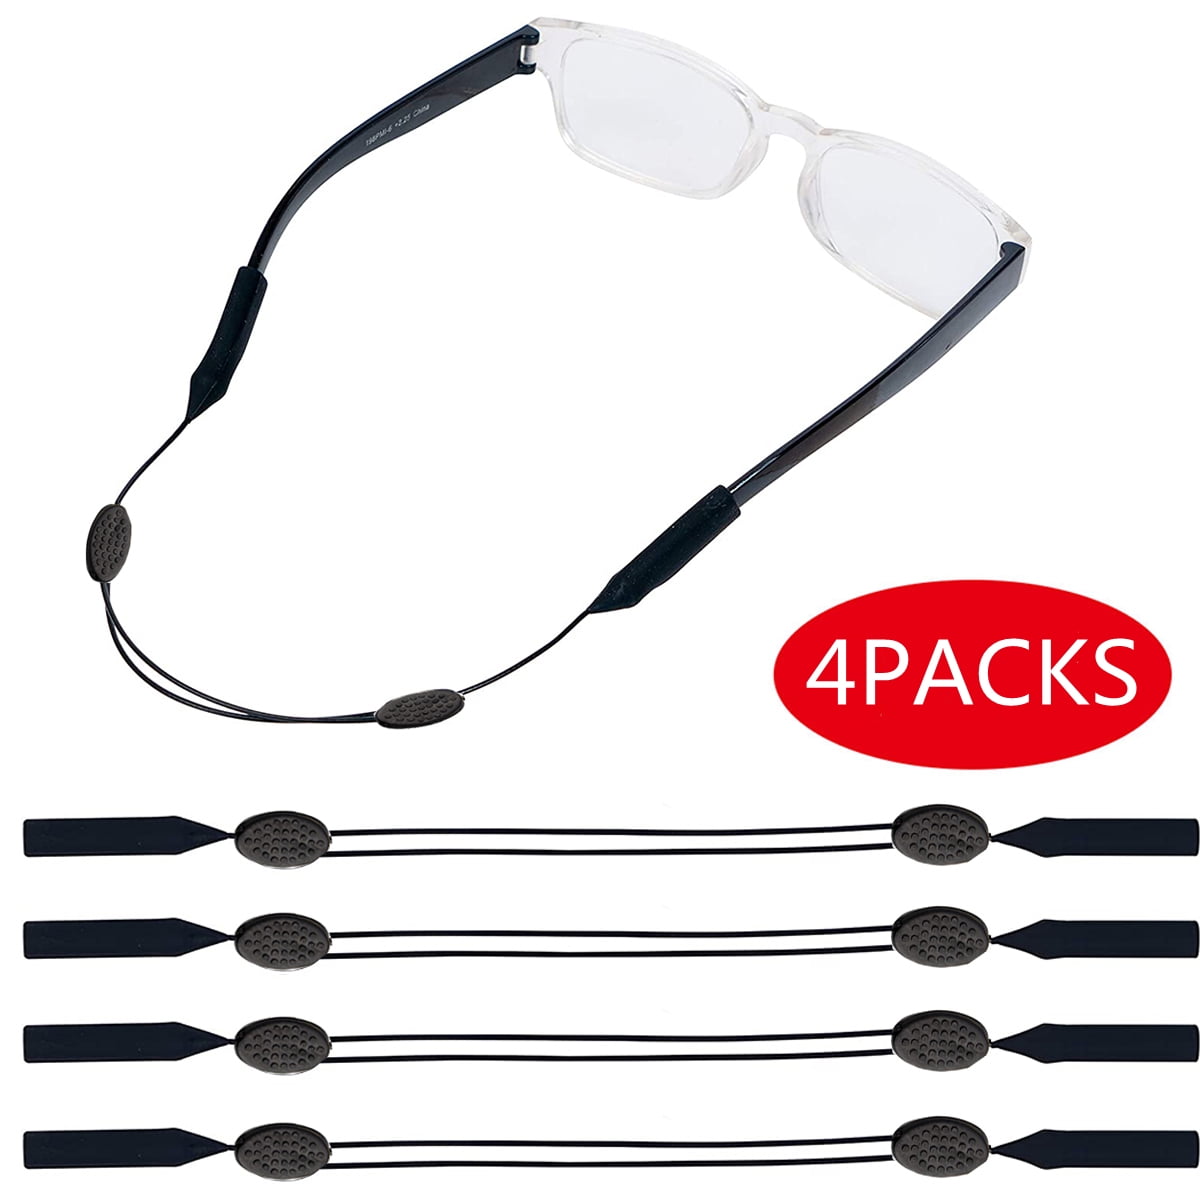 N-Specs Deluxe Adjustable Nylon Safety Glasses Neck Cord Retainers Each 